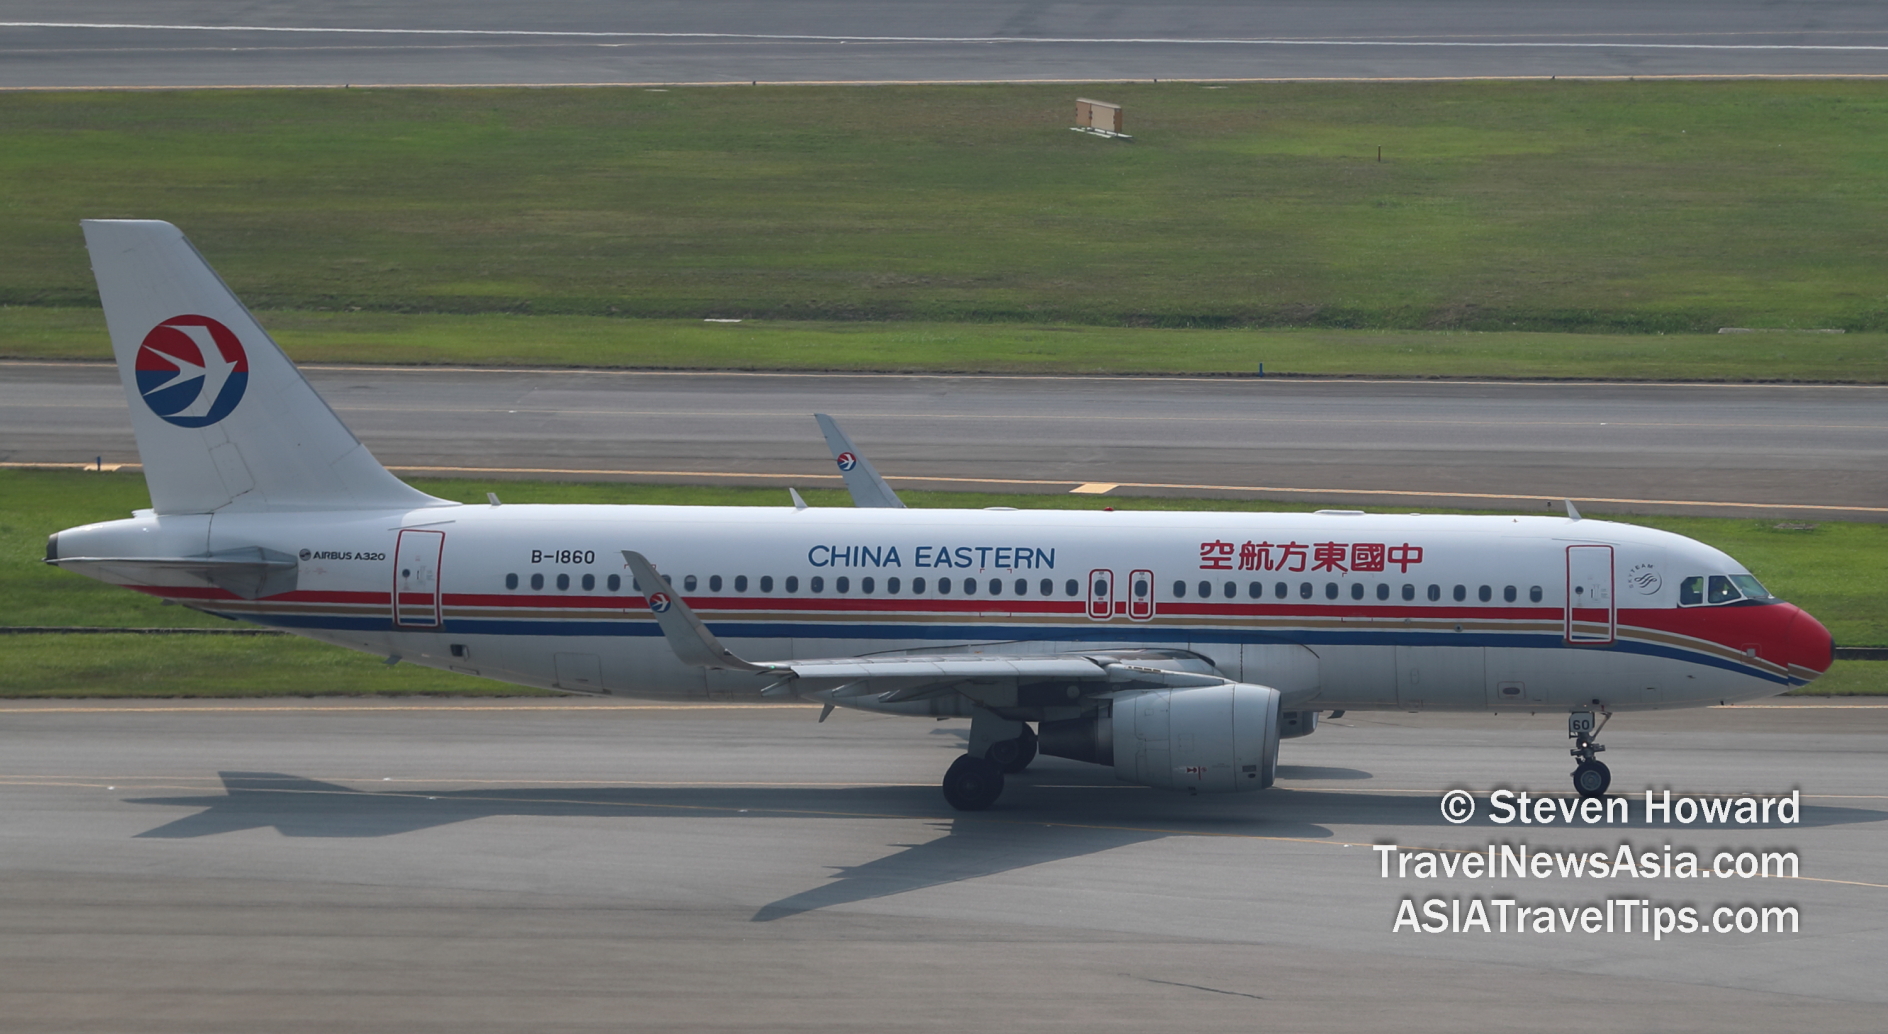 China Eastern A320. Picture by Steven Howard of TravelNewsAsia.com Click to enlarge.